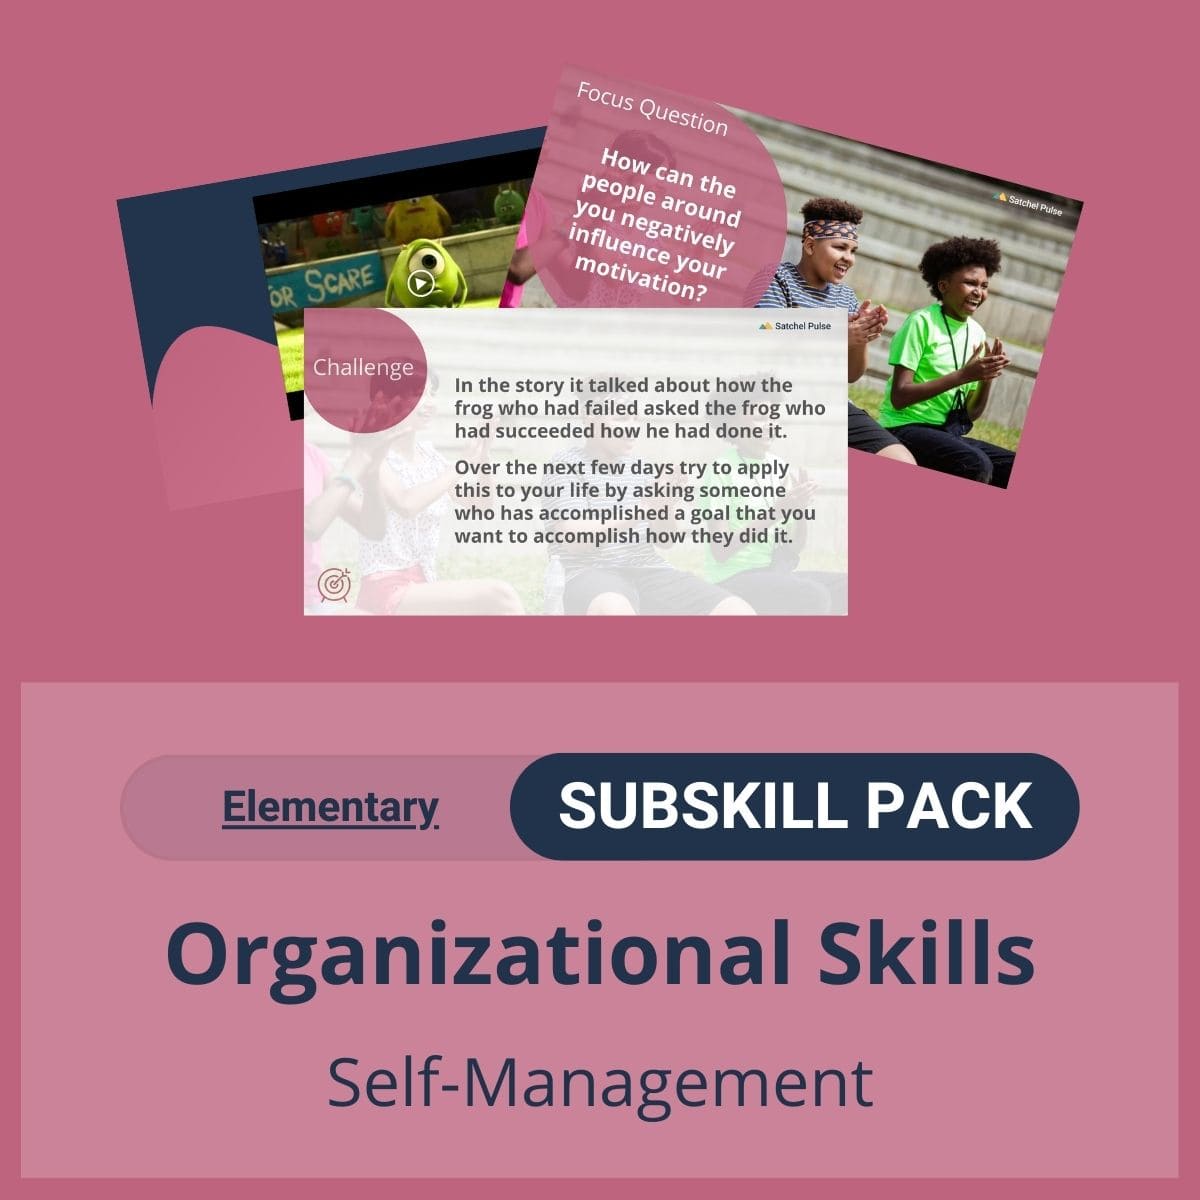 SEL Resource pack with social-emotional learning lessons and self-studies to help you teach Organizational Skills in your classroom as a part of the SEL curriculum.SEL Resource pack with social-emotional learning lessons and self-studies to help you teach Organizational Skills in your classroom as a part of the SEL curriculum.